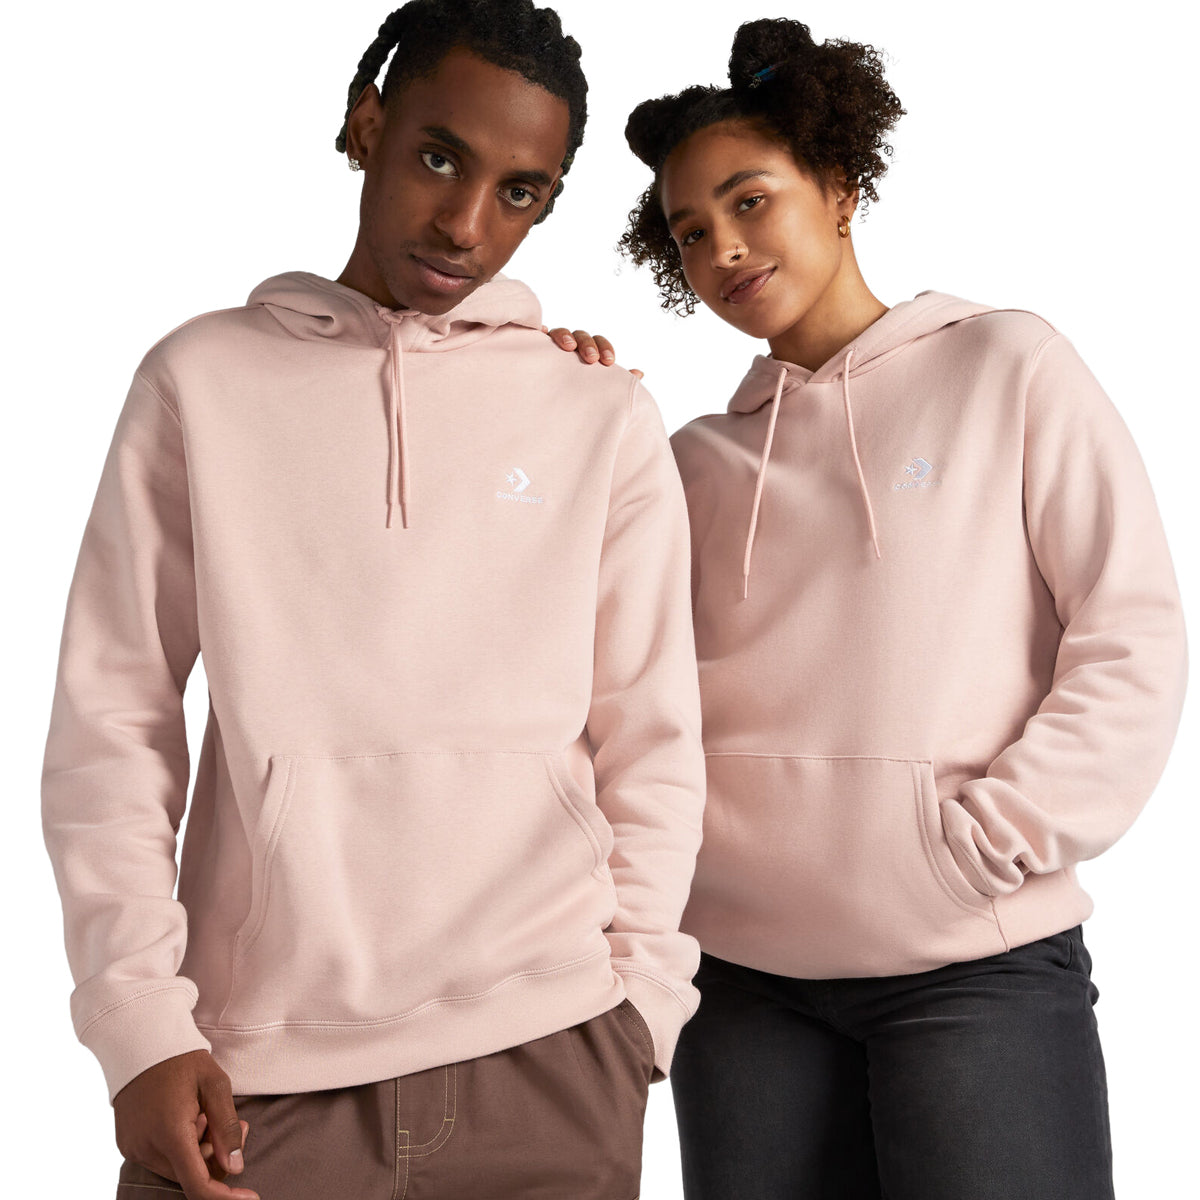 Converse Go-to Embroidered Star Chevron Hoodie - Pink Sage image 2